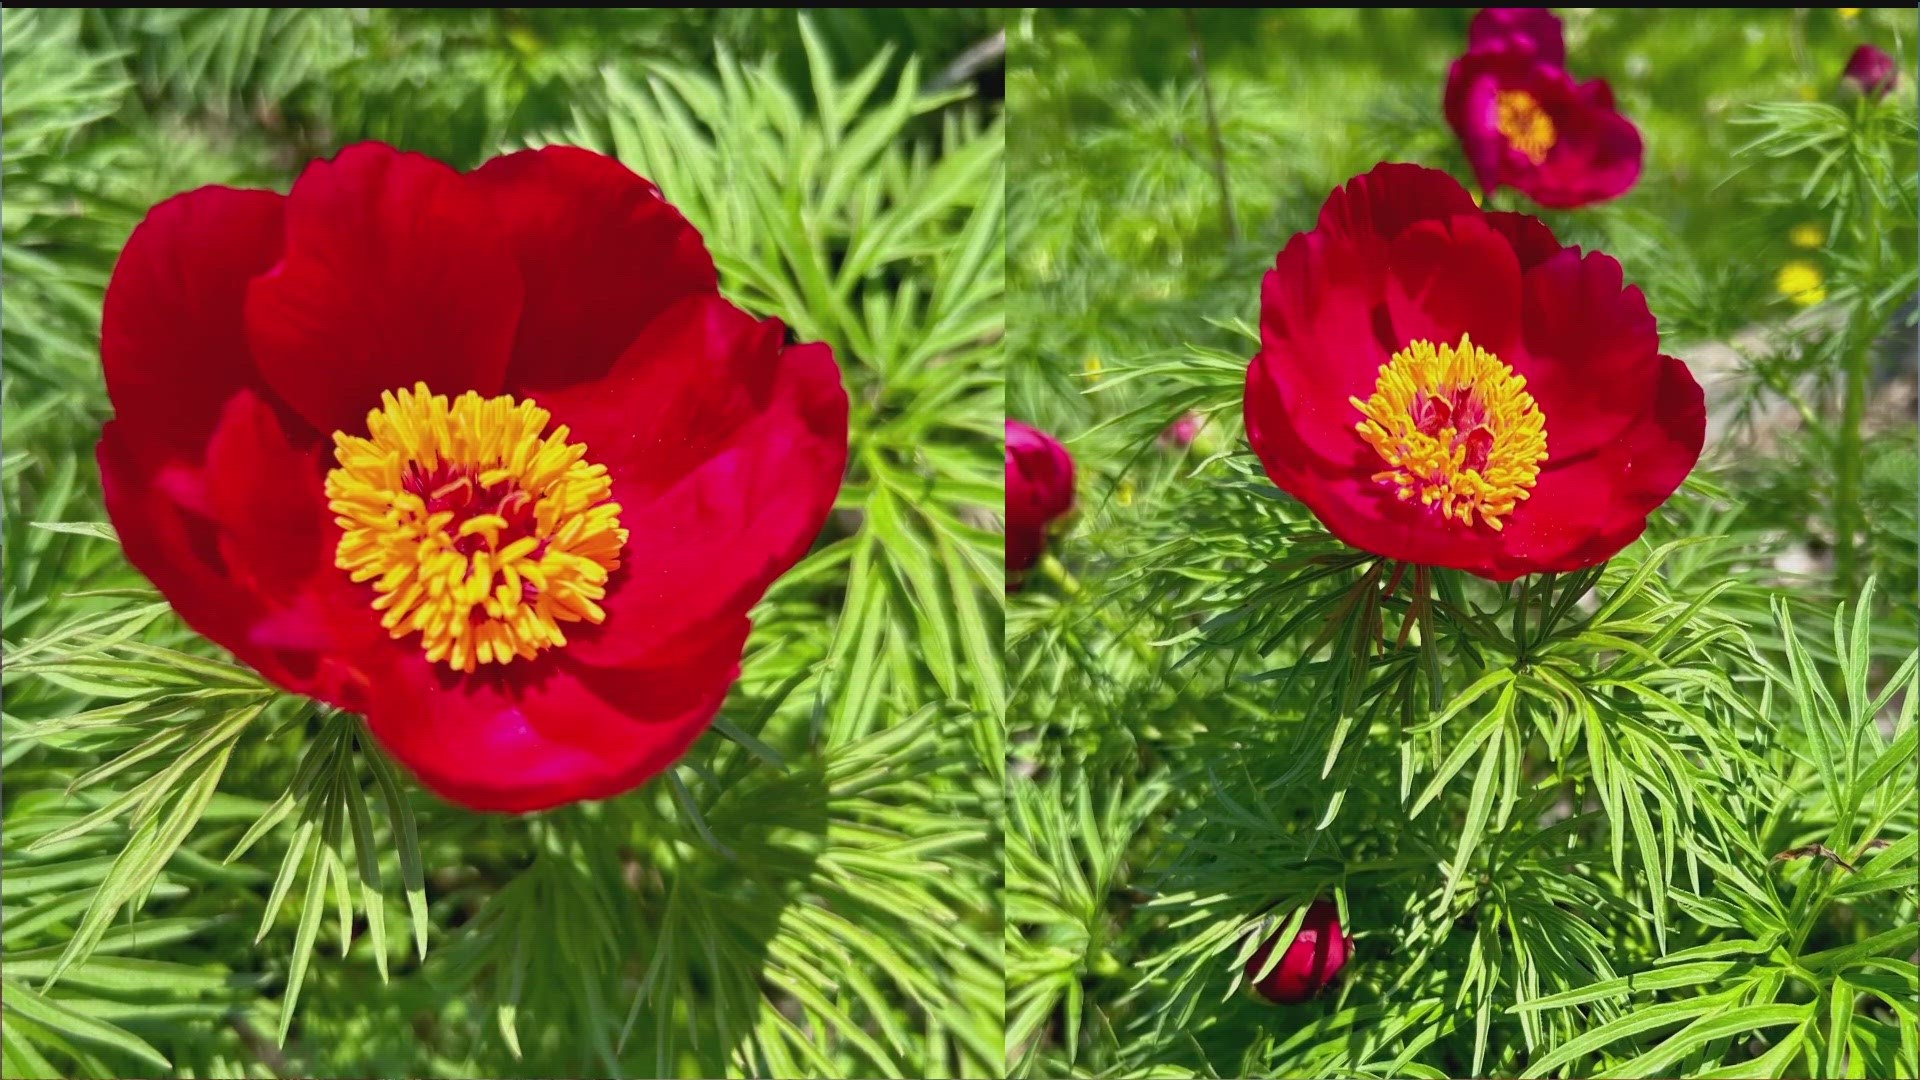 Peony season is notoriously short. But with the right varieties, it can last up to two months.